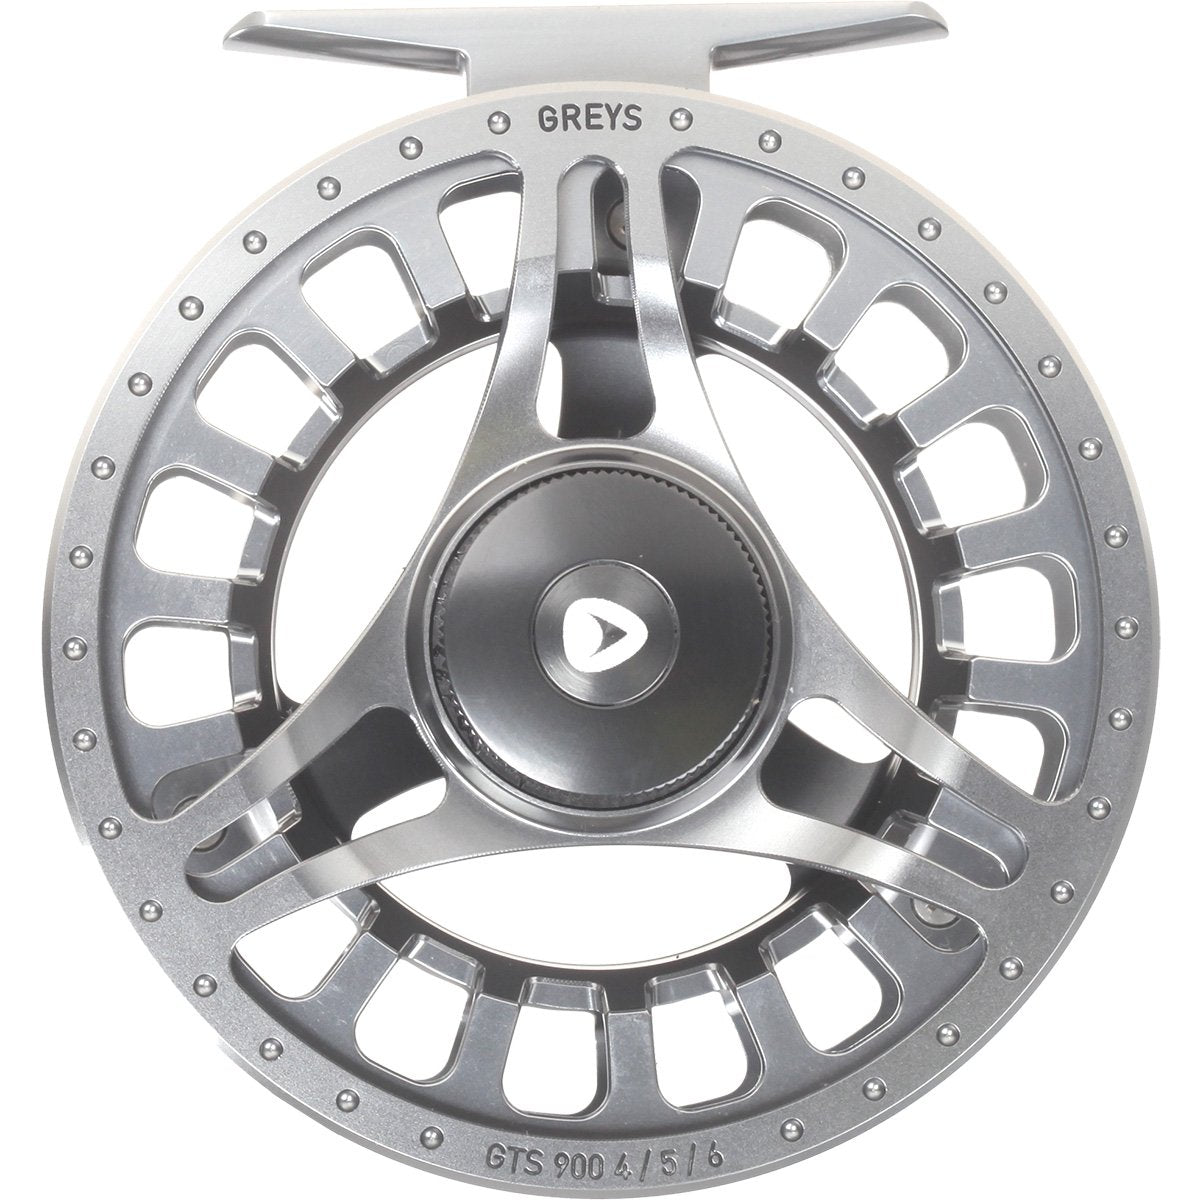 Fly Reels – Tagged Greys GTS 800 Fly Reels – Anglers World